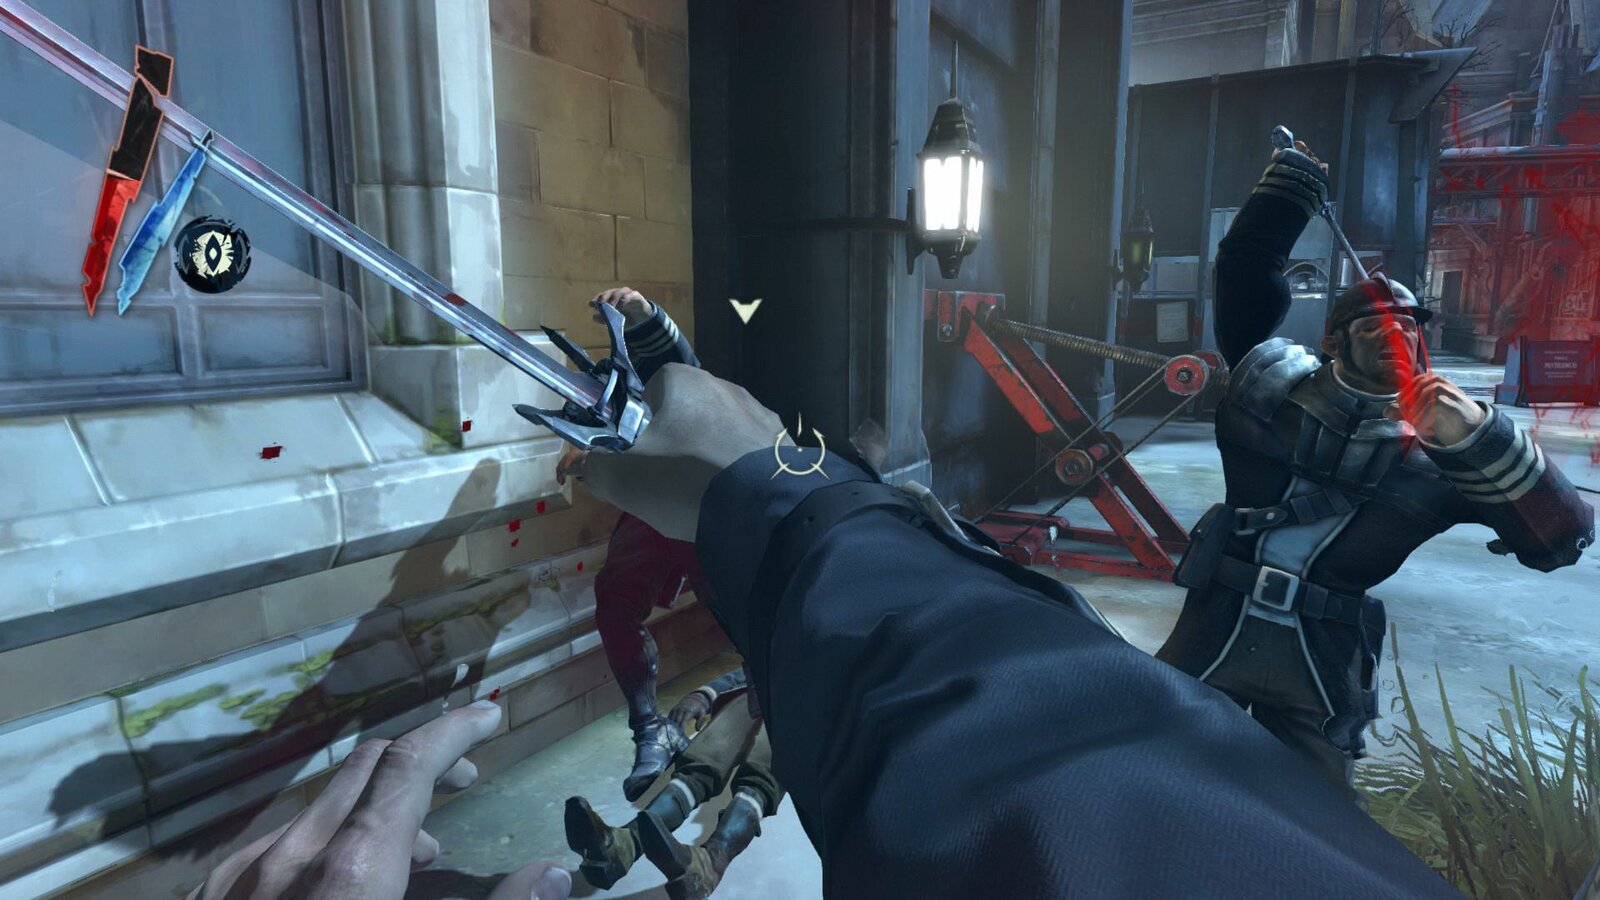 Dishonored - Void Walker Arsenal